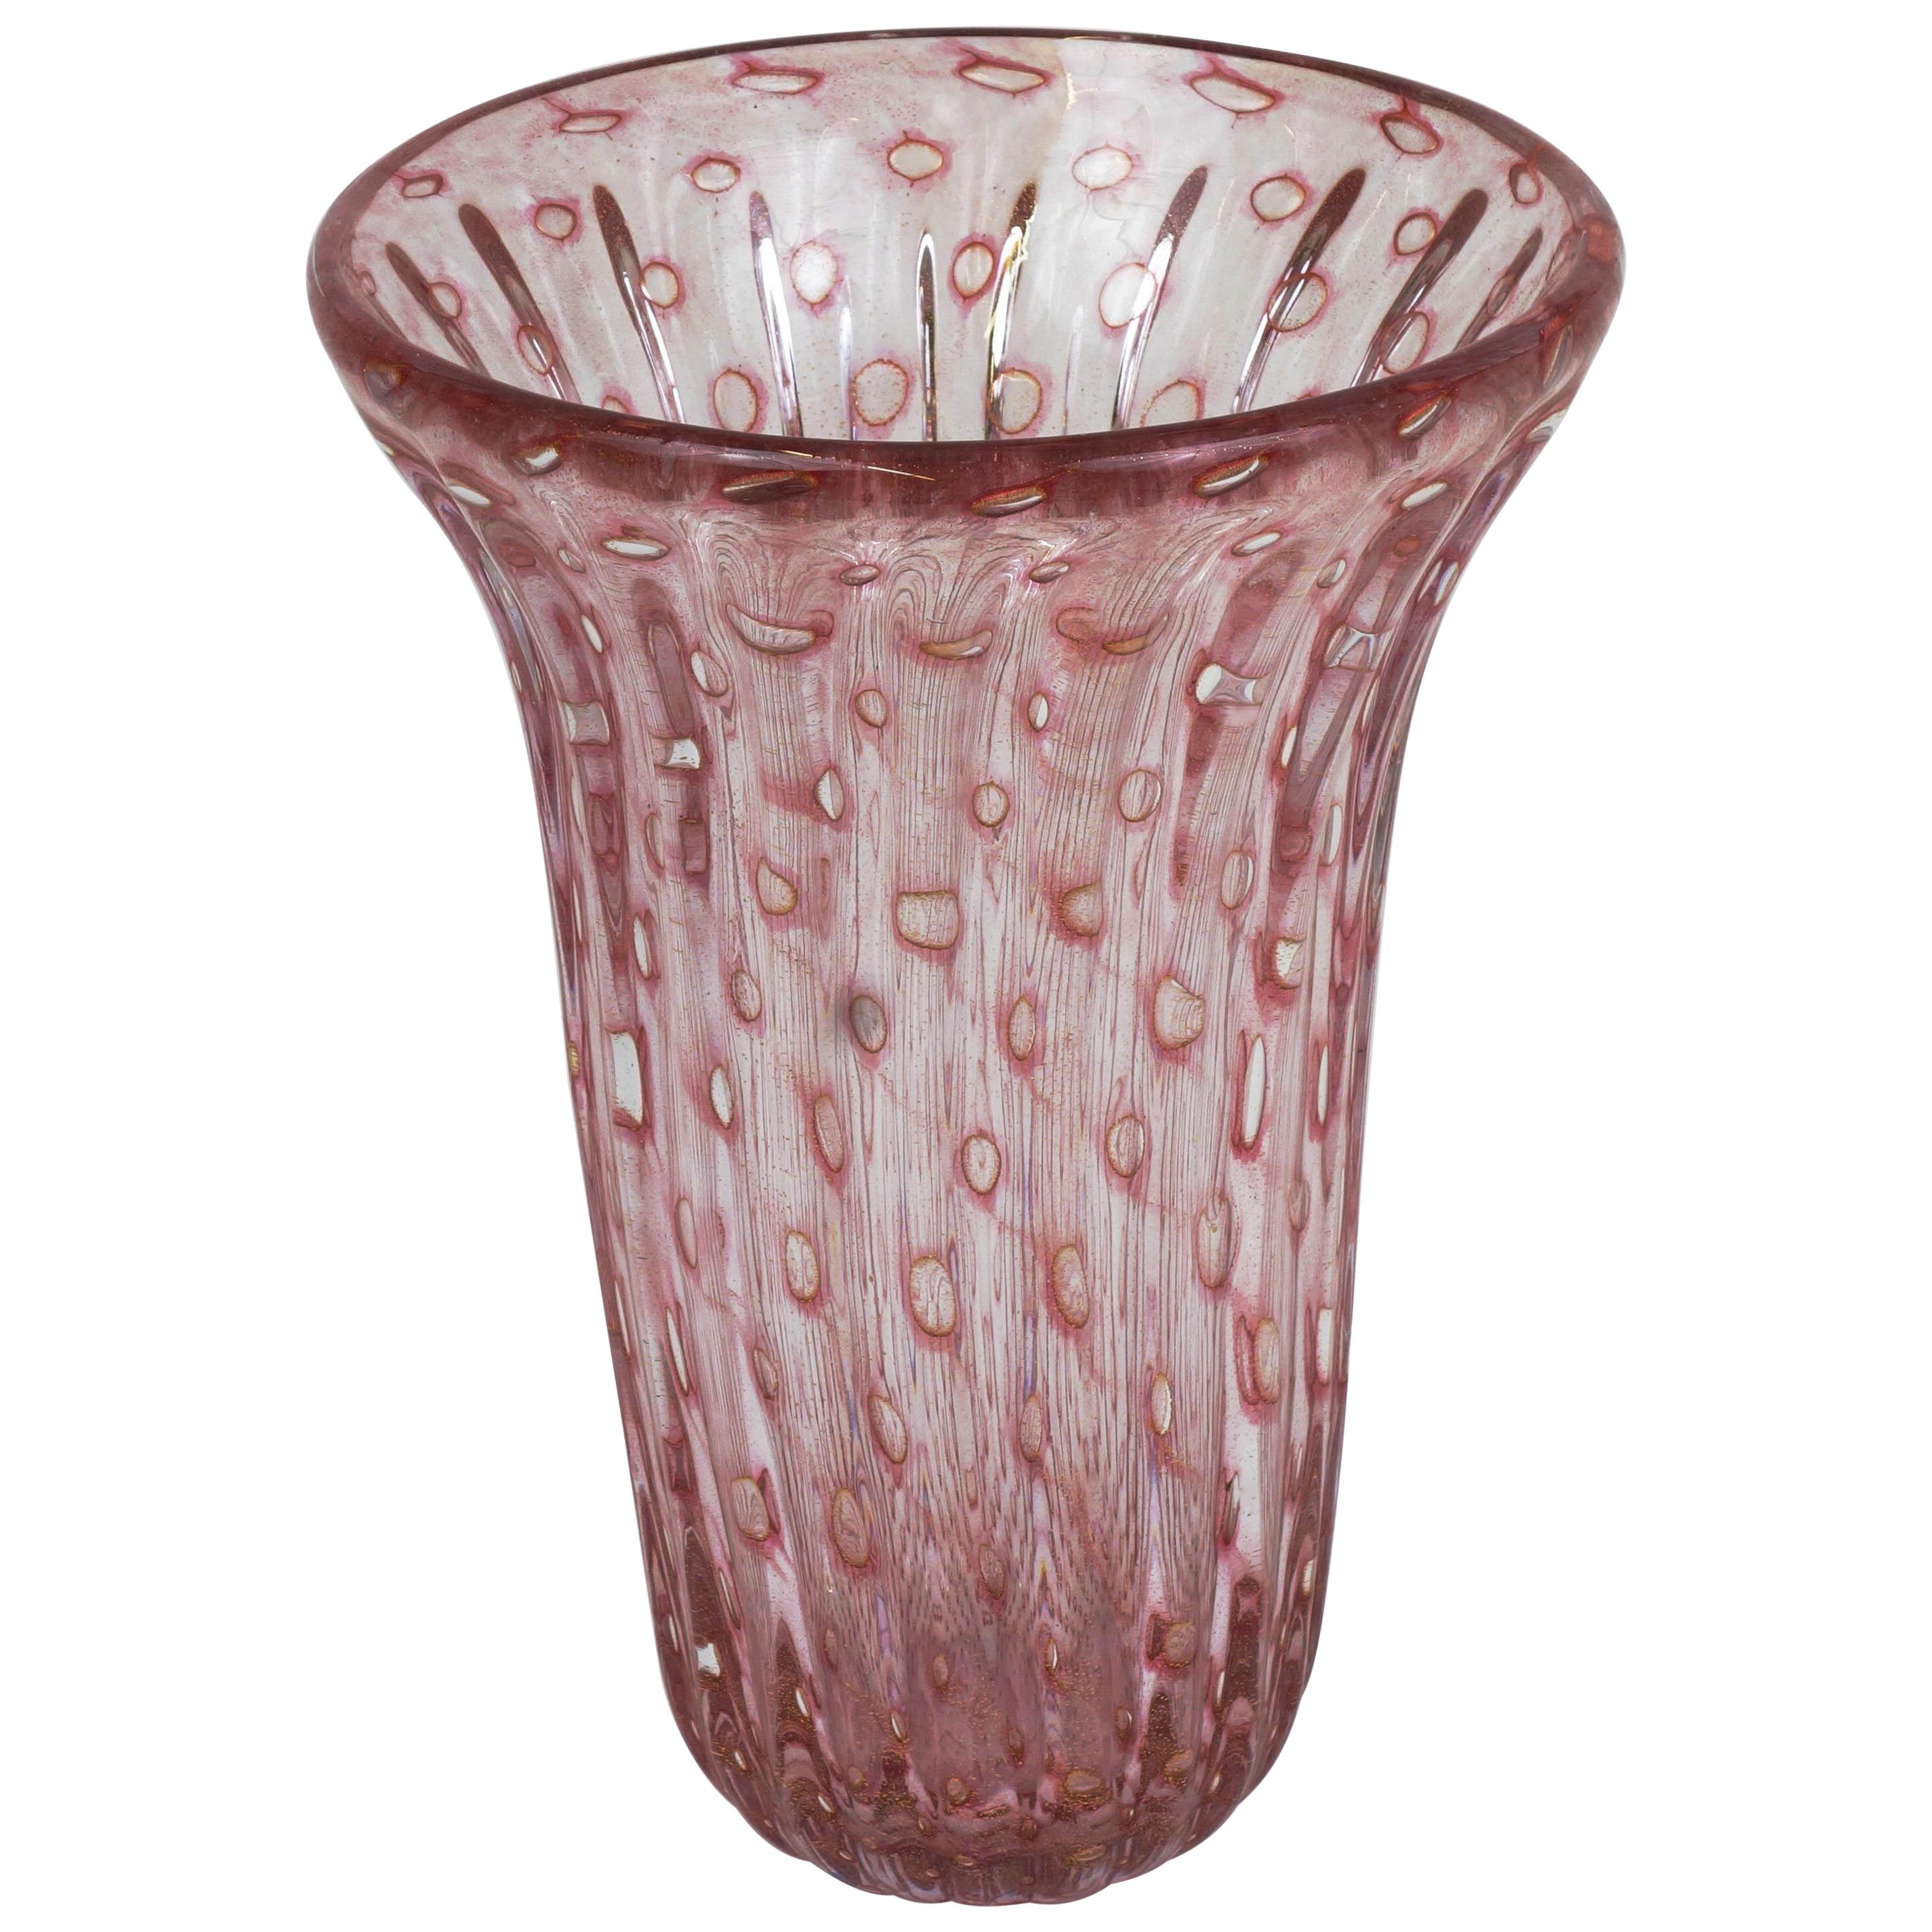 Handblown Fluted Murano Glass Vase by Fratelli Toso, Murano, Italy, 1950s